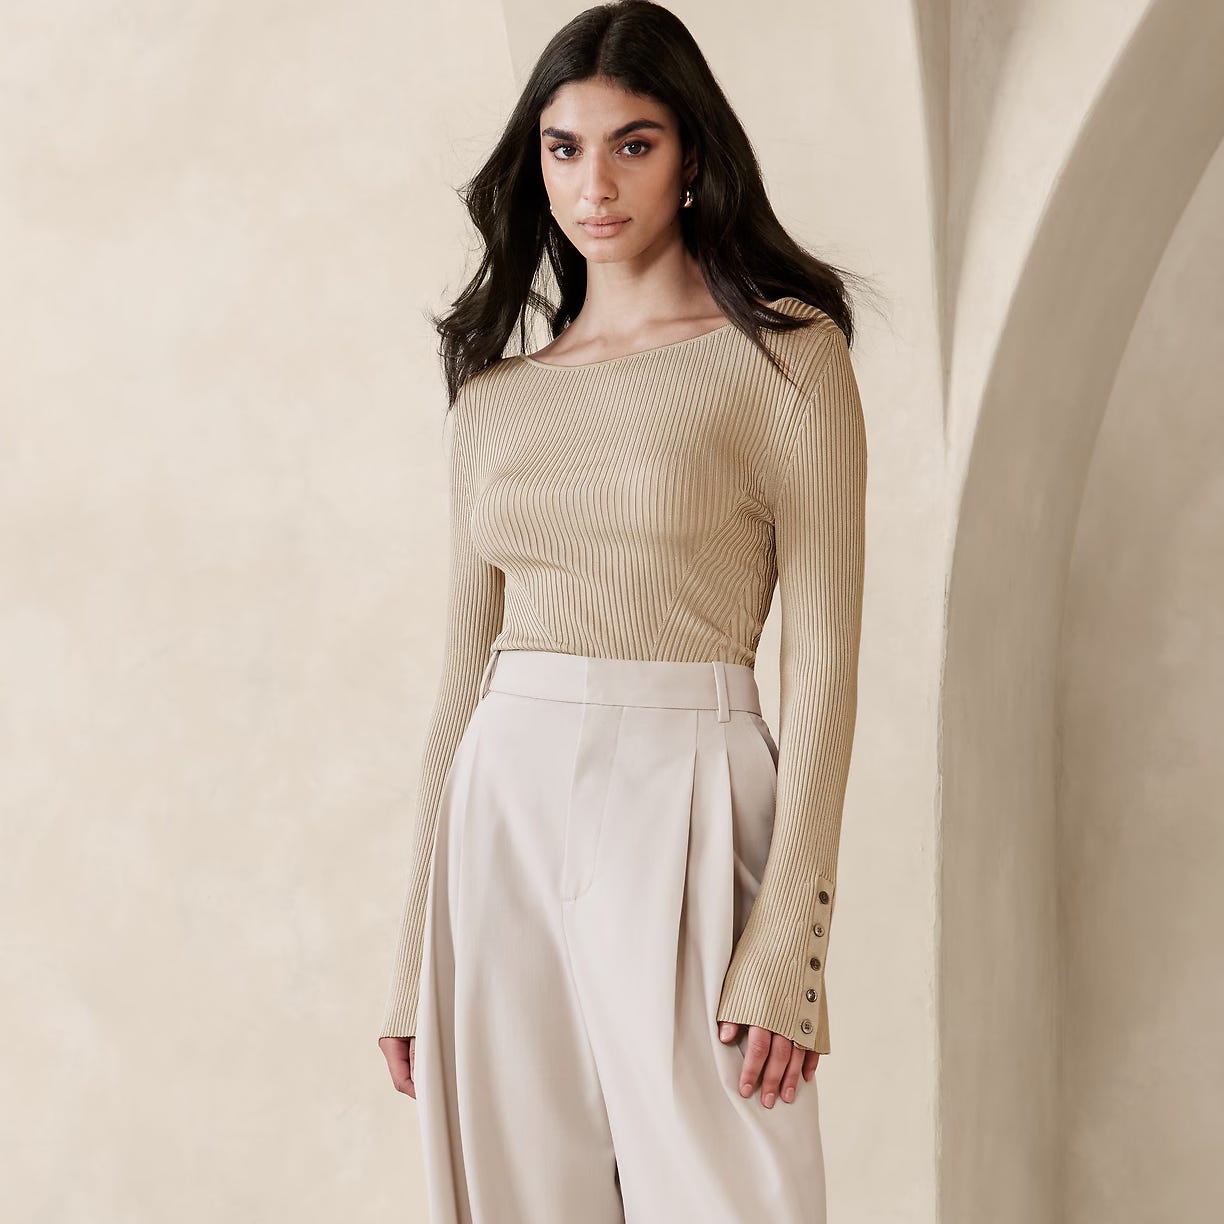 A woman is wearing a beige ribbed sweater and high-waisted cream trousers.